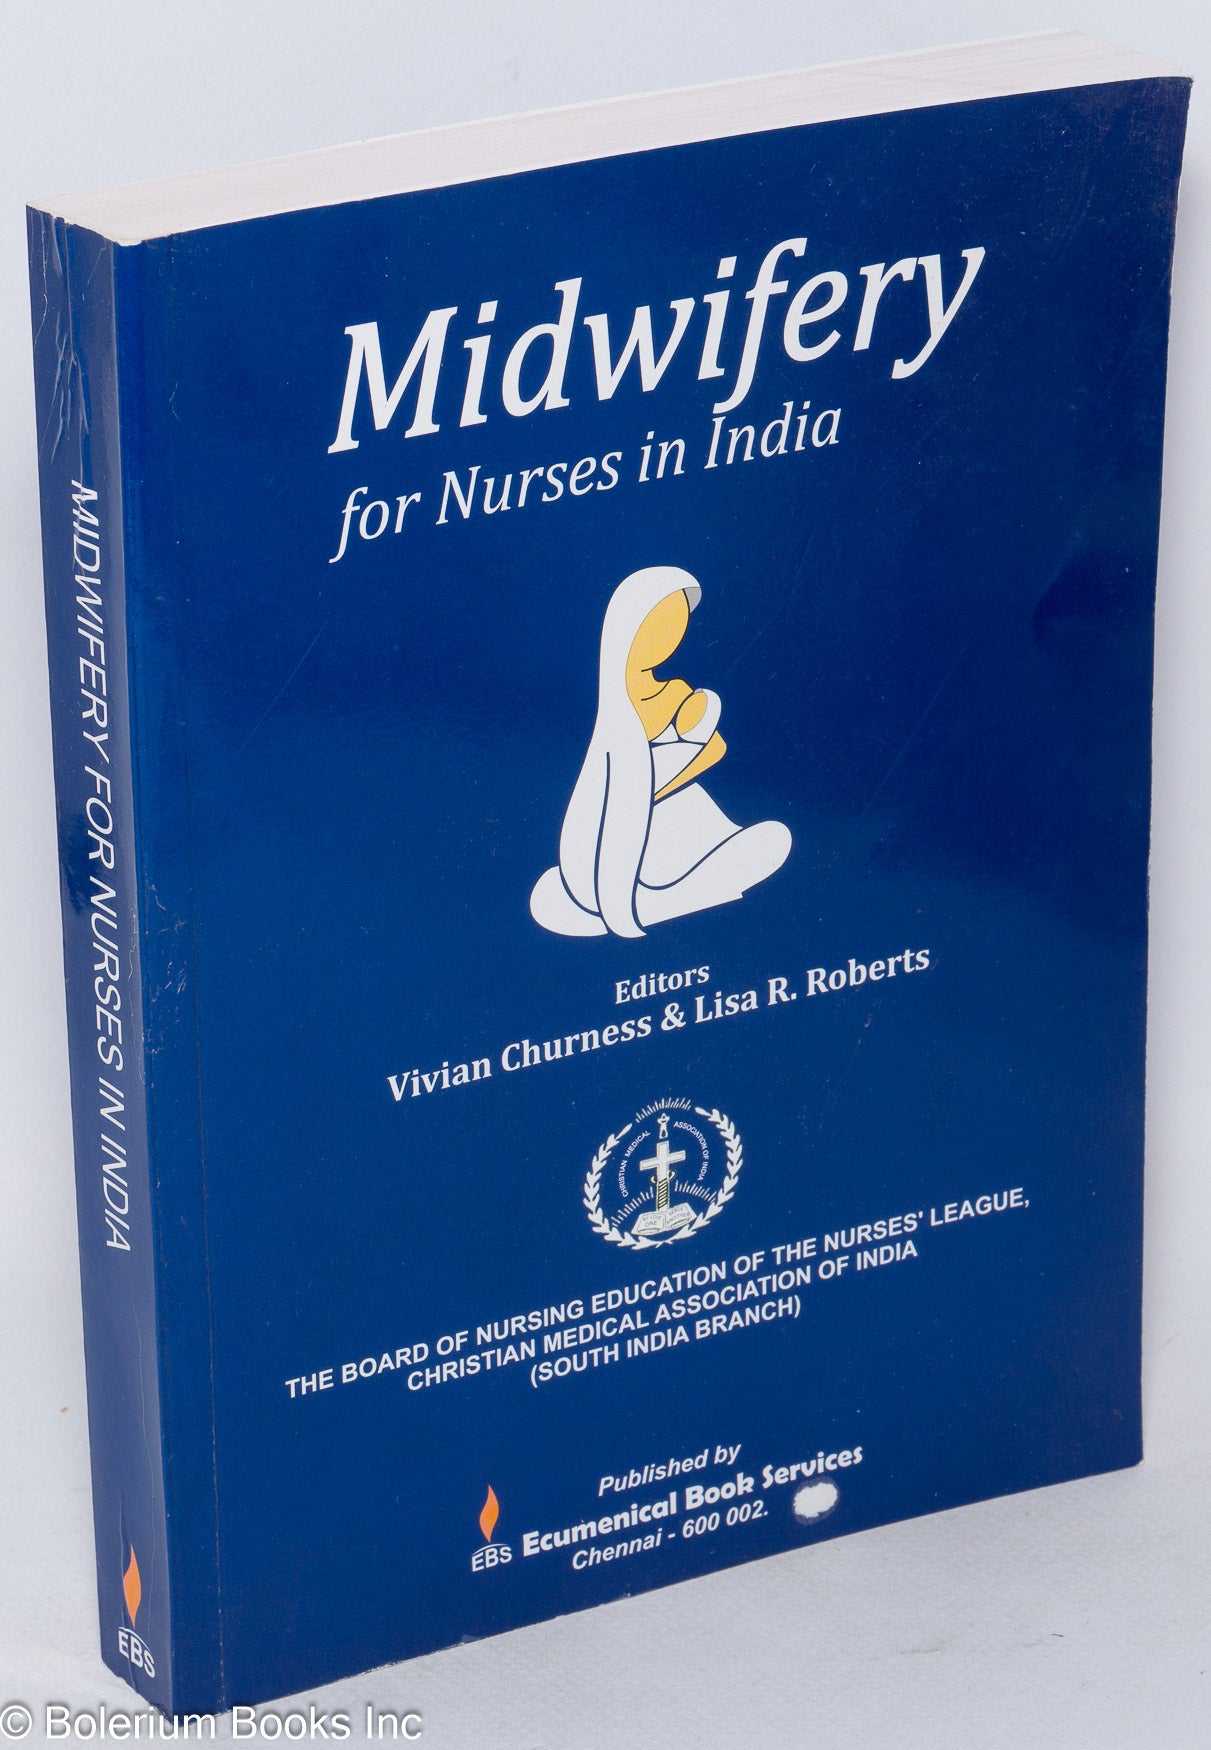 Midwifery for nurses in India Vivan Churness, Lisa Roberts picture